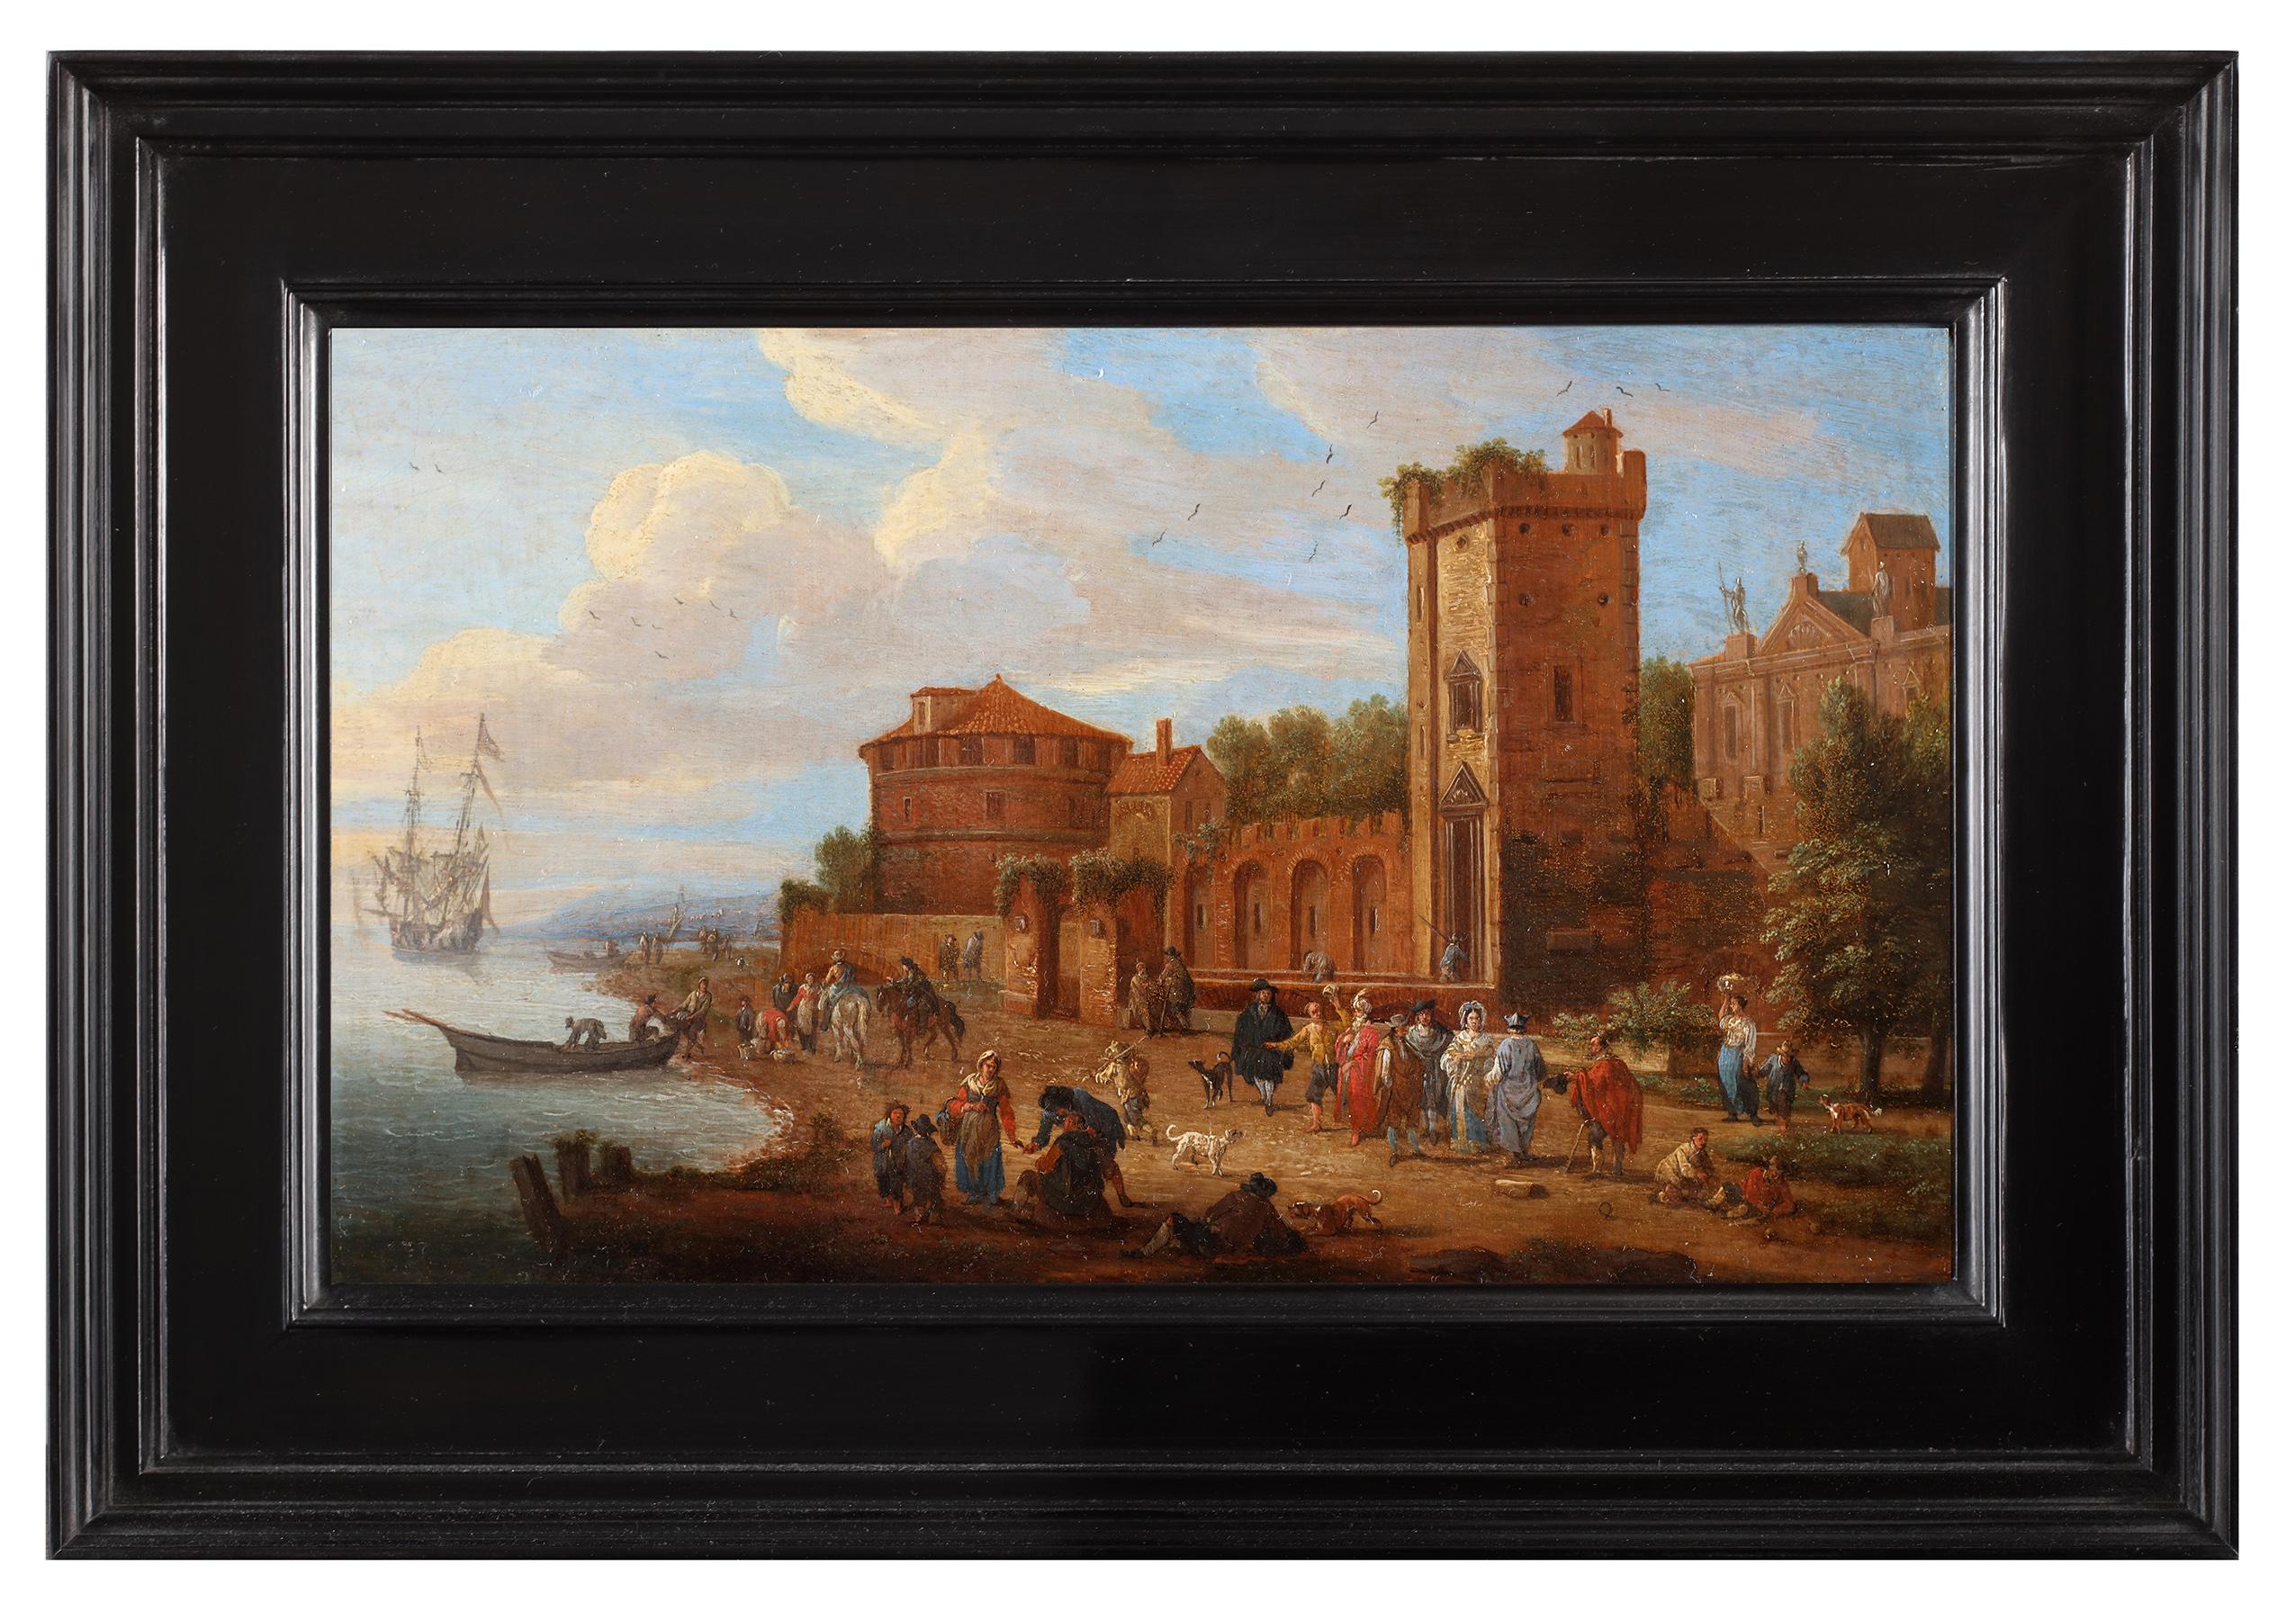 Animated harbor scene near a fortified palace - Matthijs Schoevaerdts - Painting by Mathijs Schoevaerdts